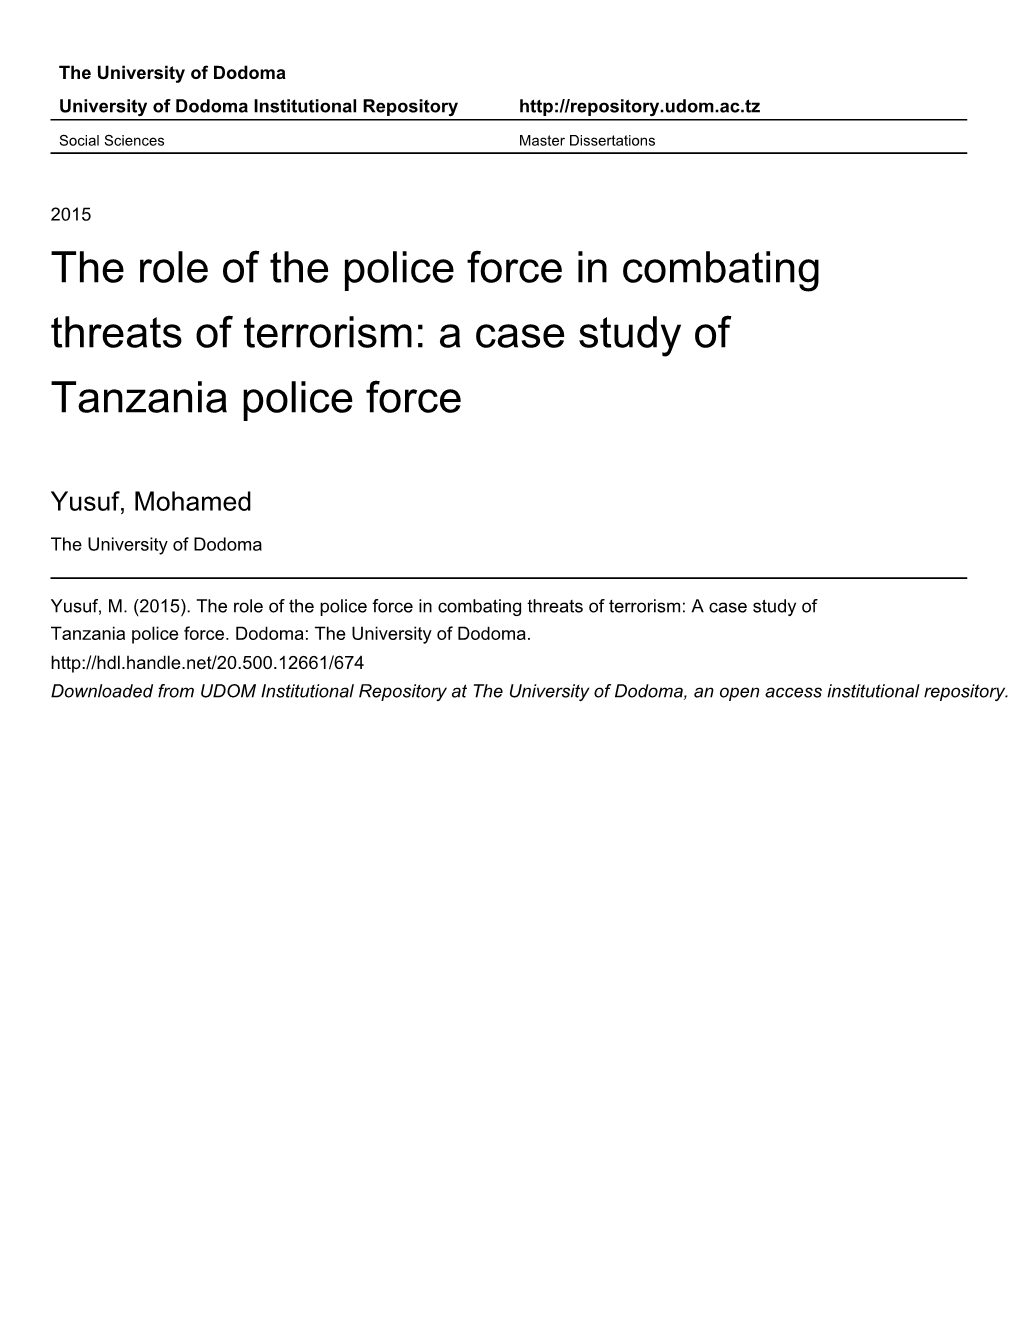 The Role of the Police Force in Combating Threats of Terrorism: a Case Study of Tanzania Police Force